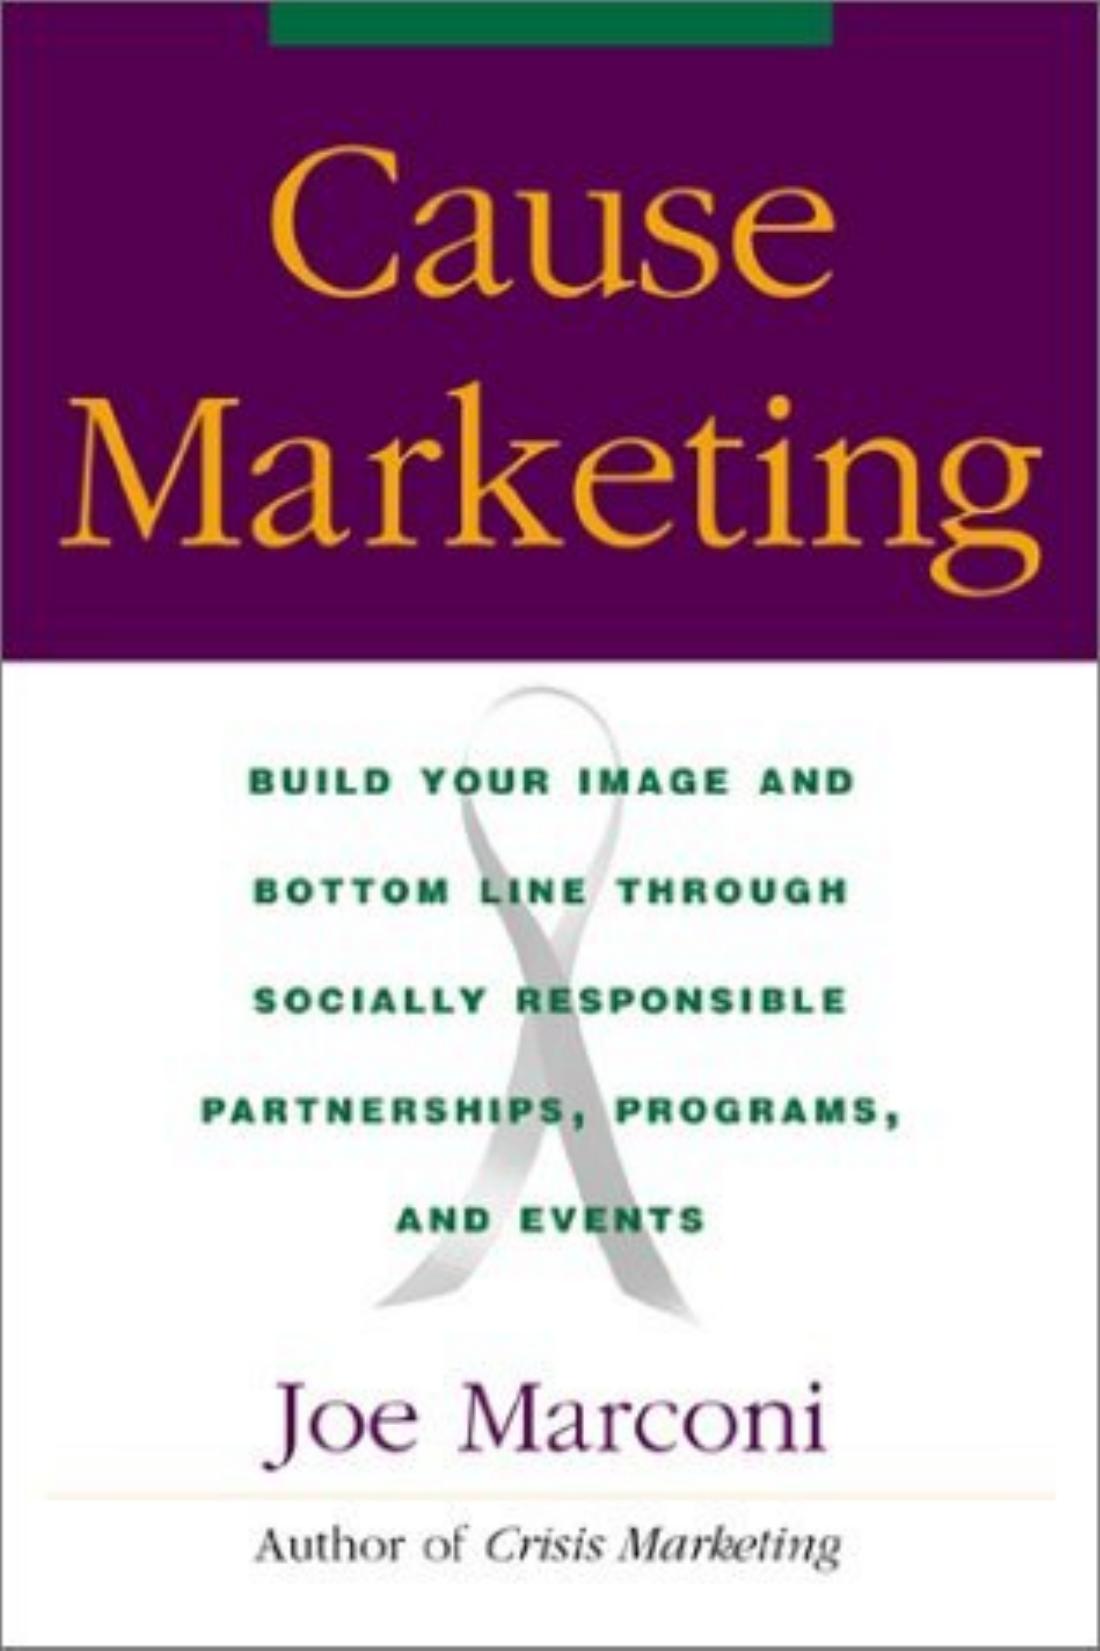 Cause Marketing : Build Your Image and Bottom Line Through Socially Responsible Partnerships, Programs, and Events